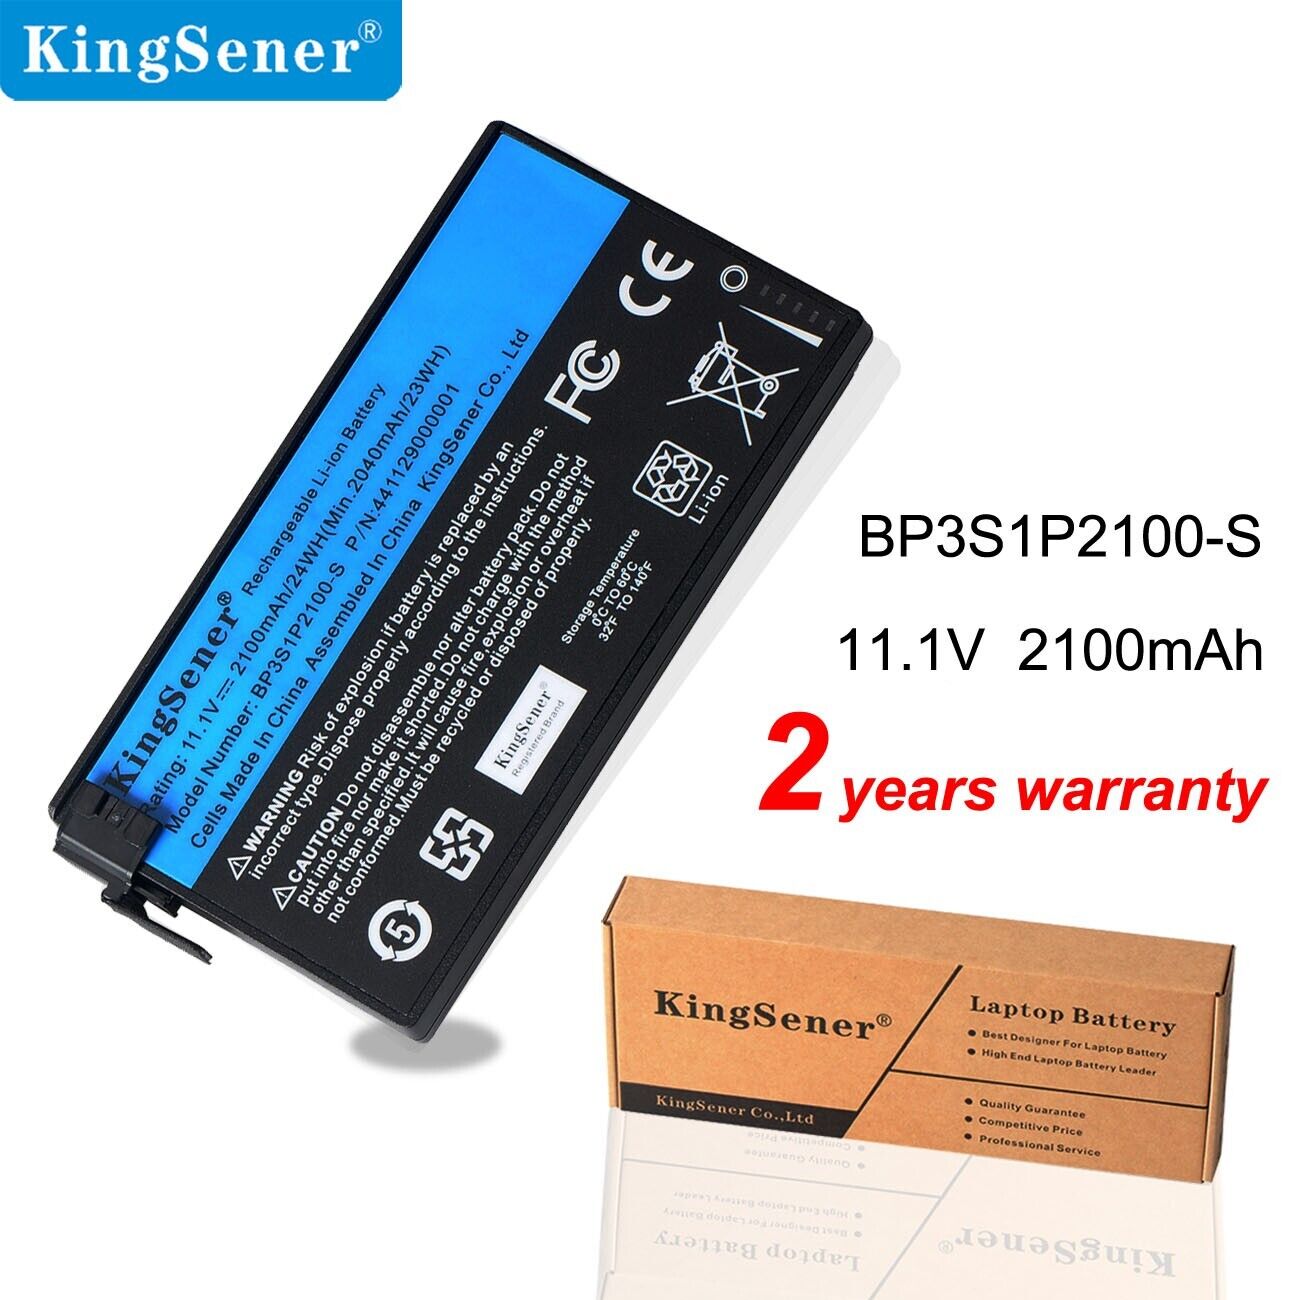 BP3S1P2100-S New Genuine Battery for Getac V110 441129000001 Rugged Notebook